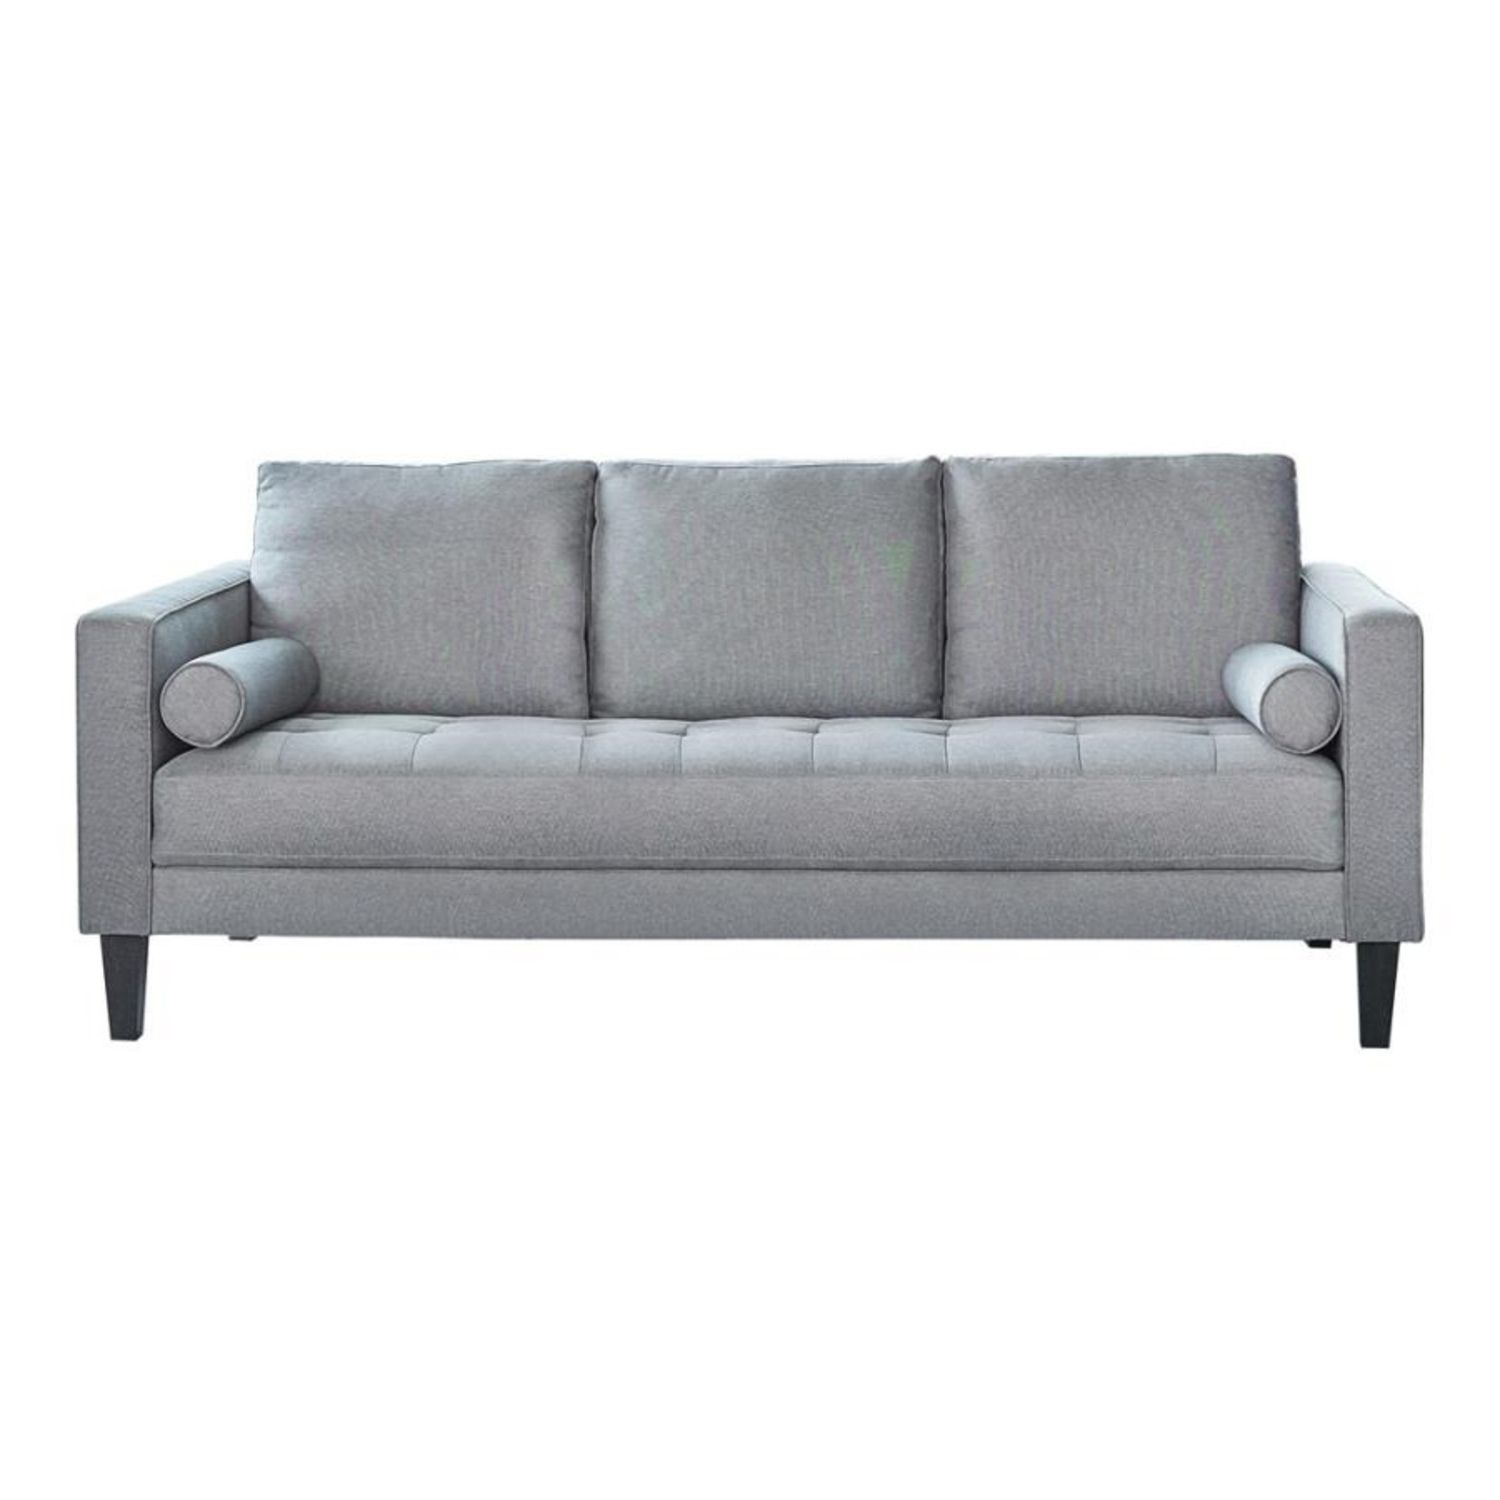 Trendy Modern Sofa In Linen Like Charcoal Upholstery – Aptdeco With Light Charcoal Linen Sofas (View 10 of 15)